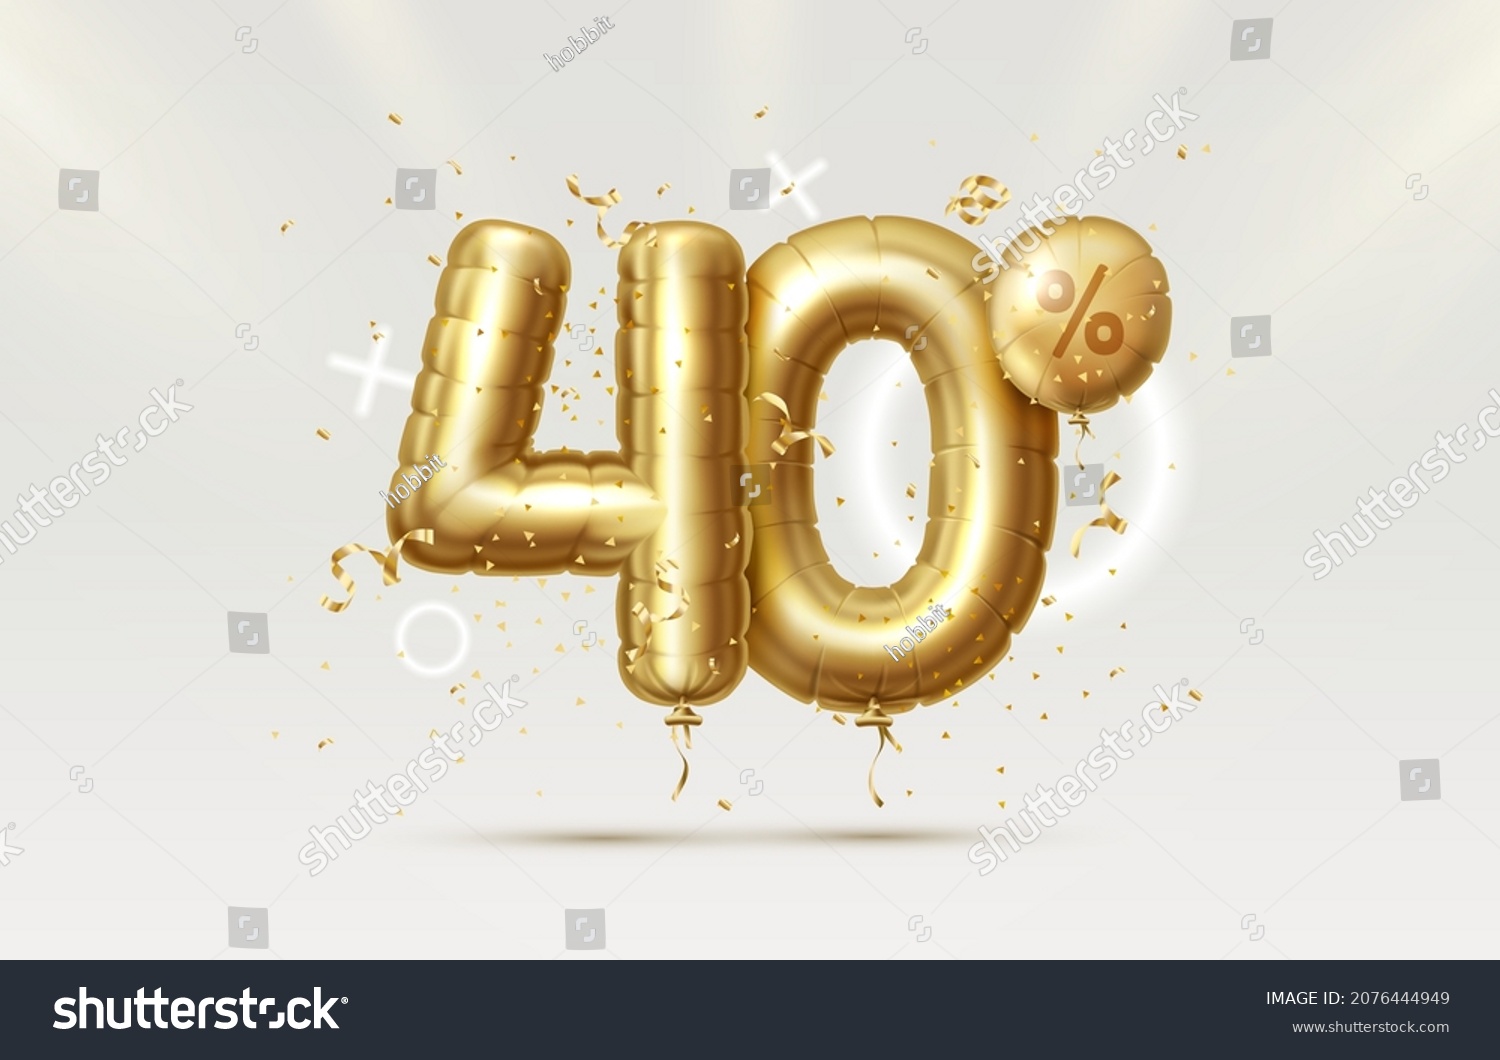 SVG of 40 Off. Discount creative composition. 3d Golden sale symbol with decorative objects, heart shaped balloons, golden confetti, podium and gift box. Sale banner and poster. Vector illustration. svg